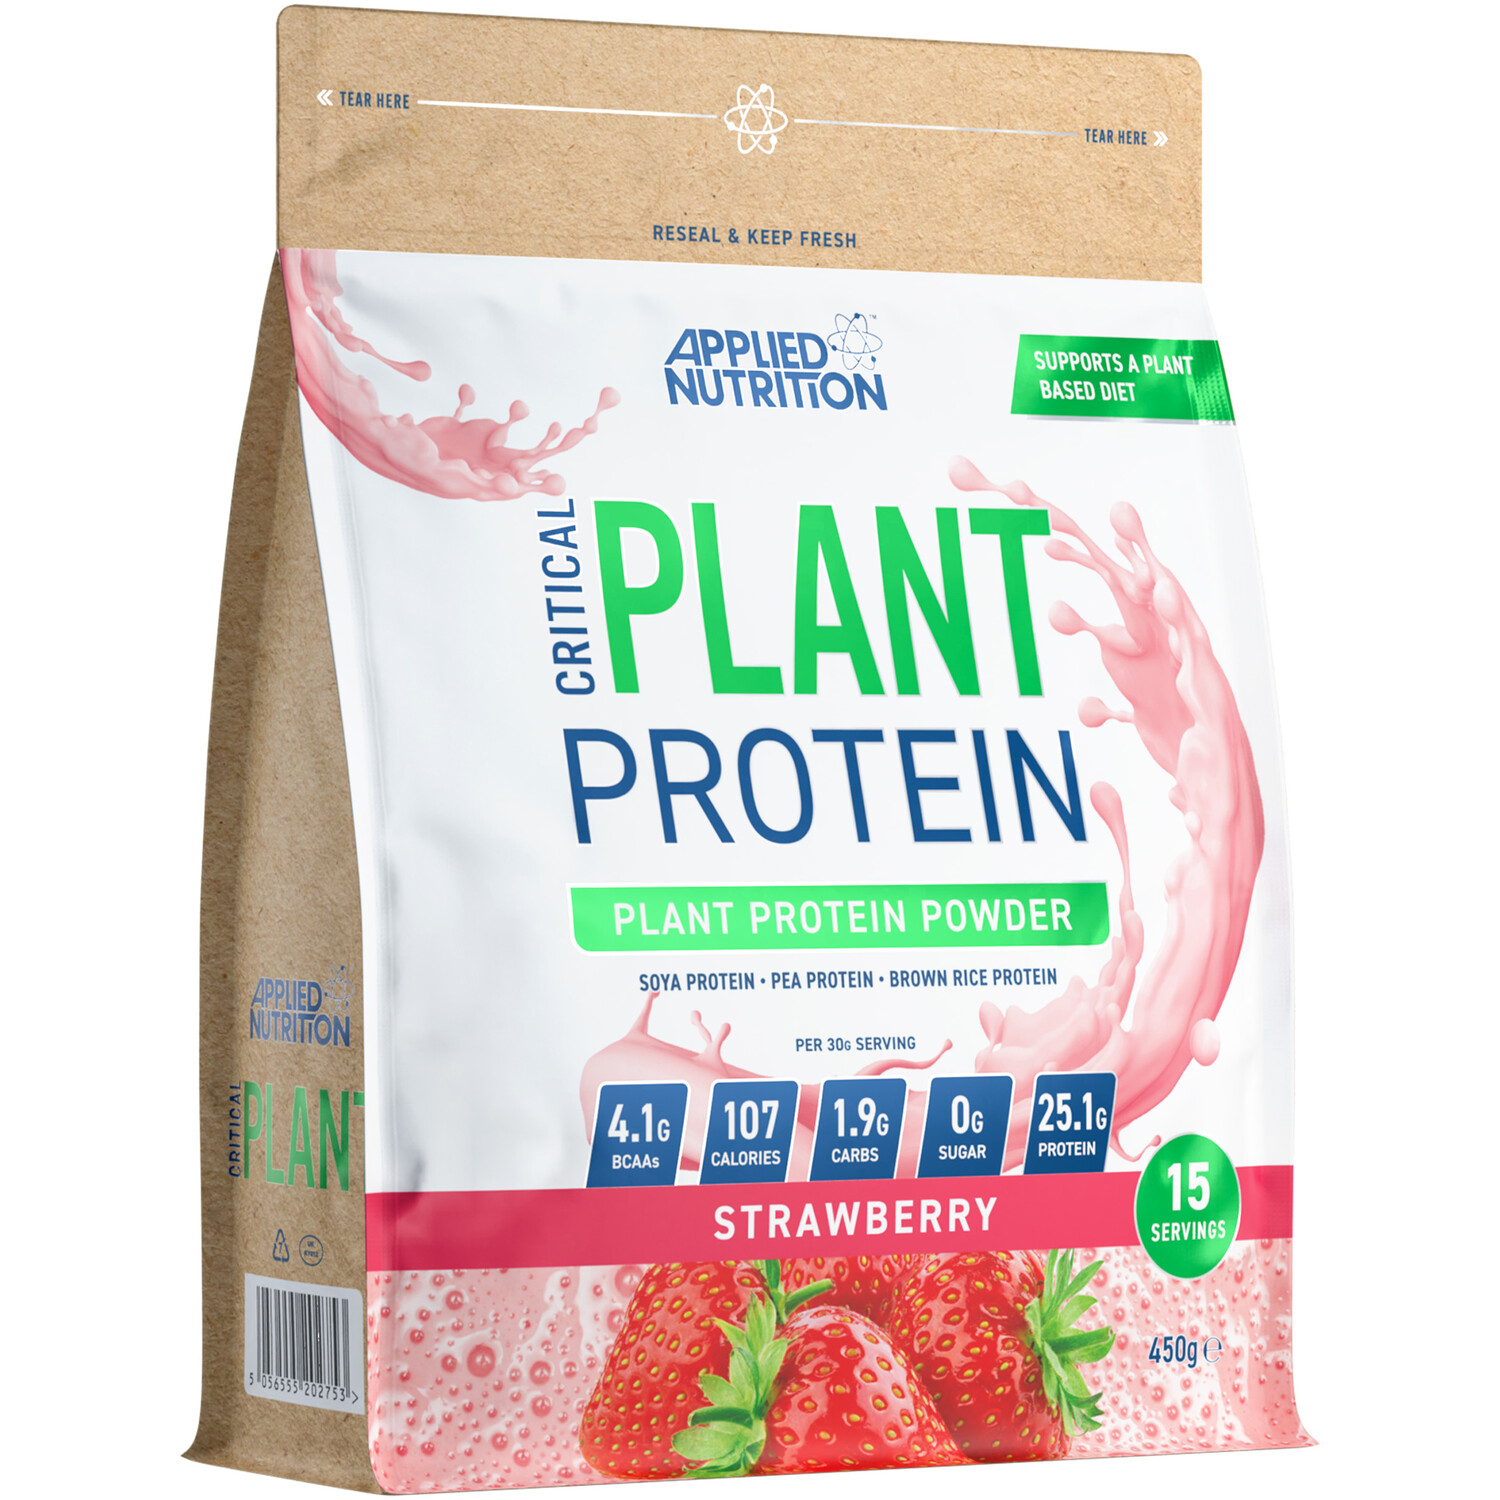 Strawberry Critical Plant Protein Powder - Natural Image 1